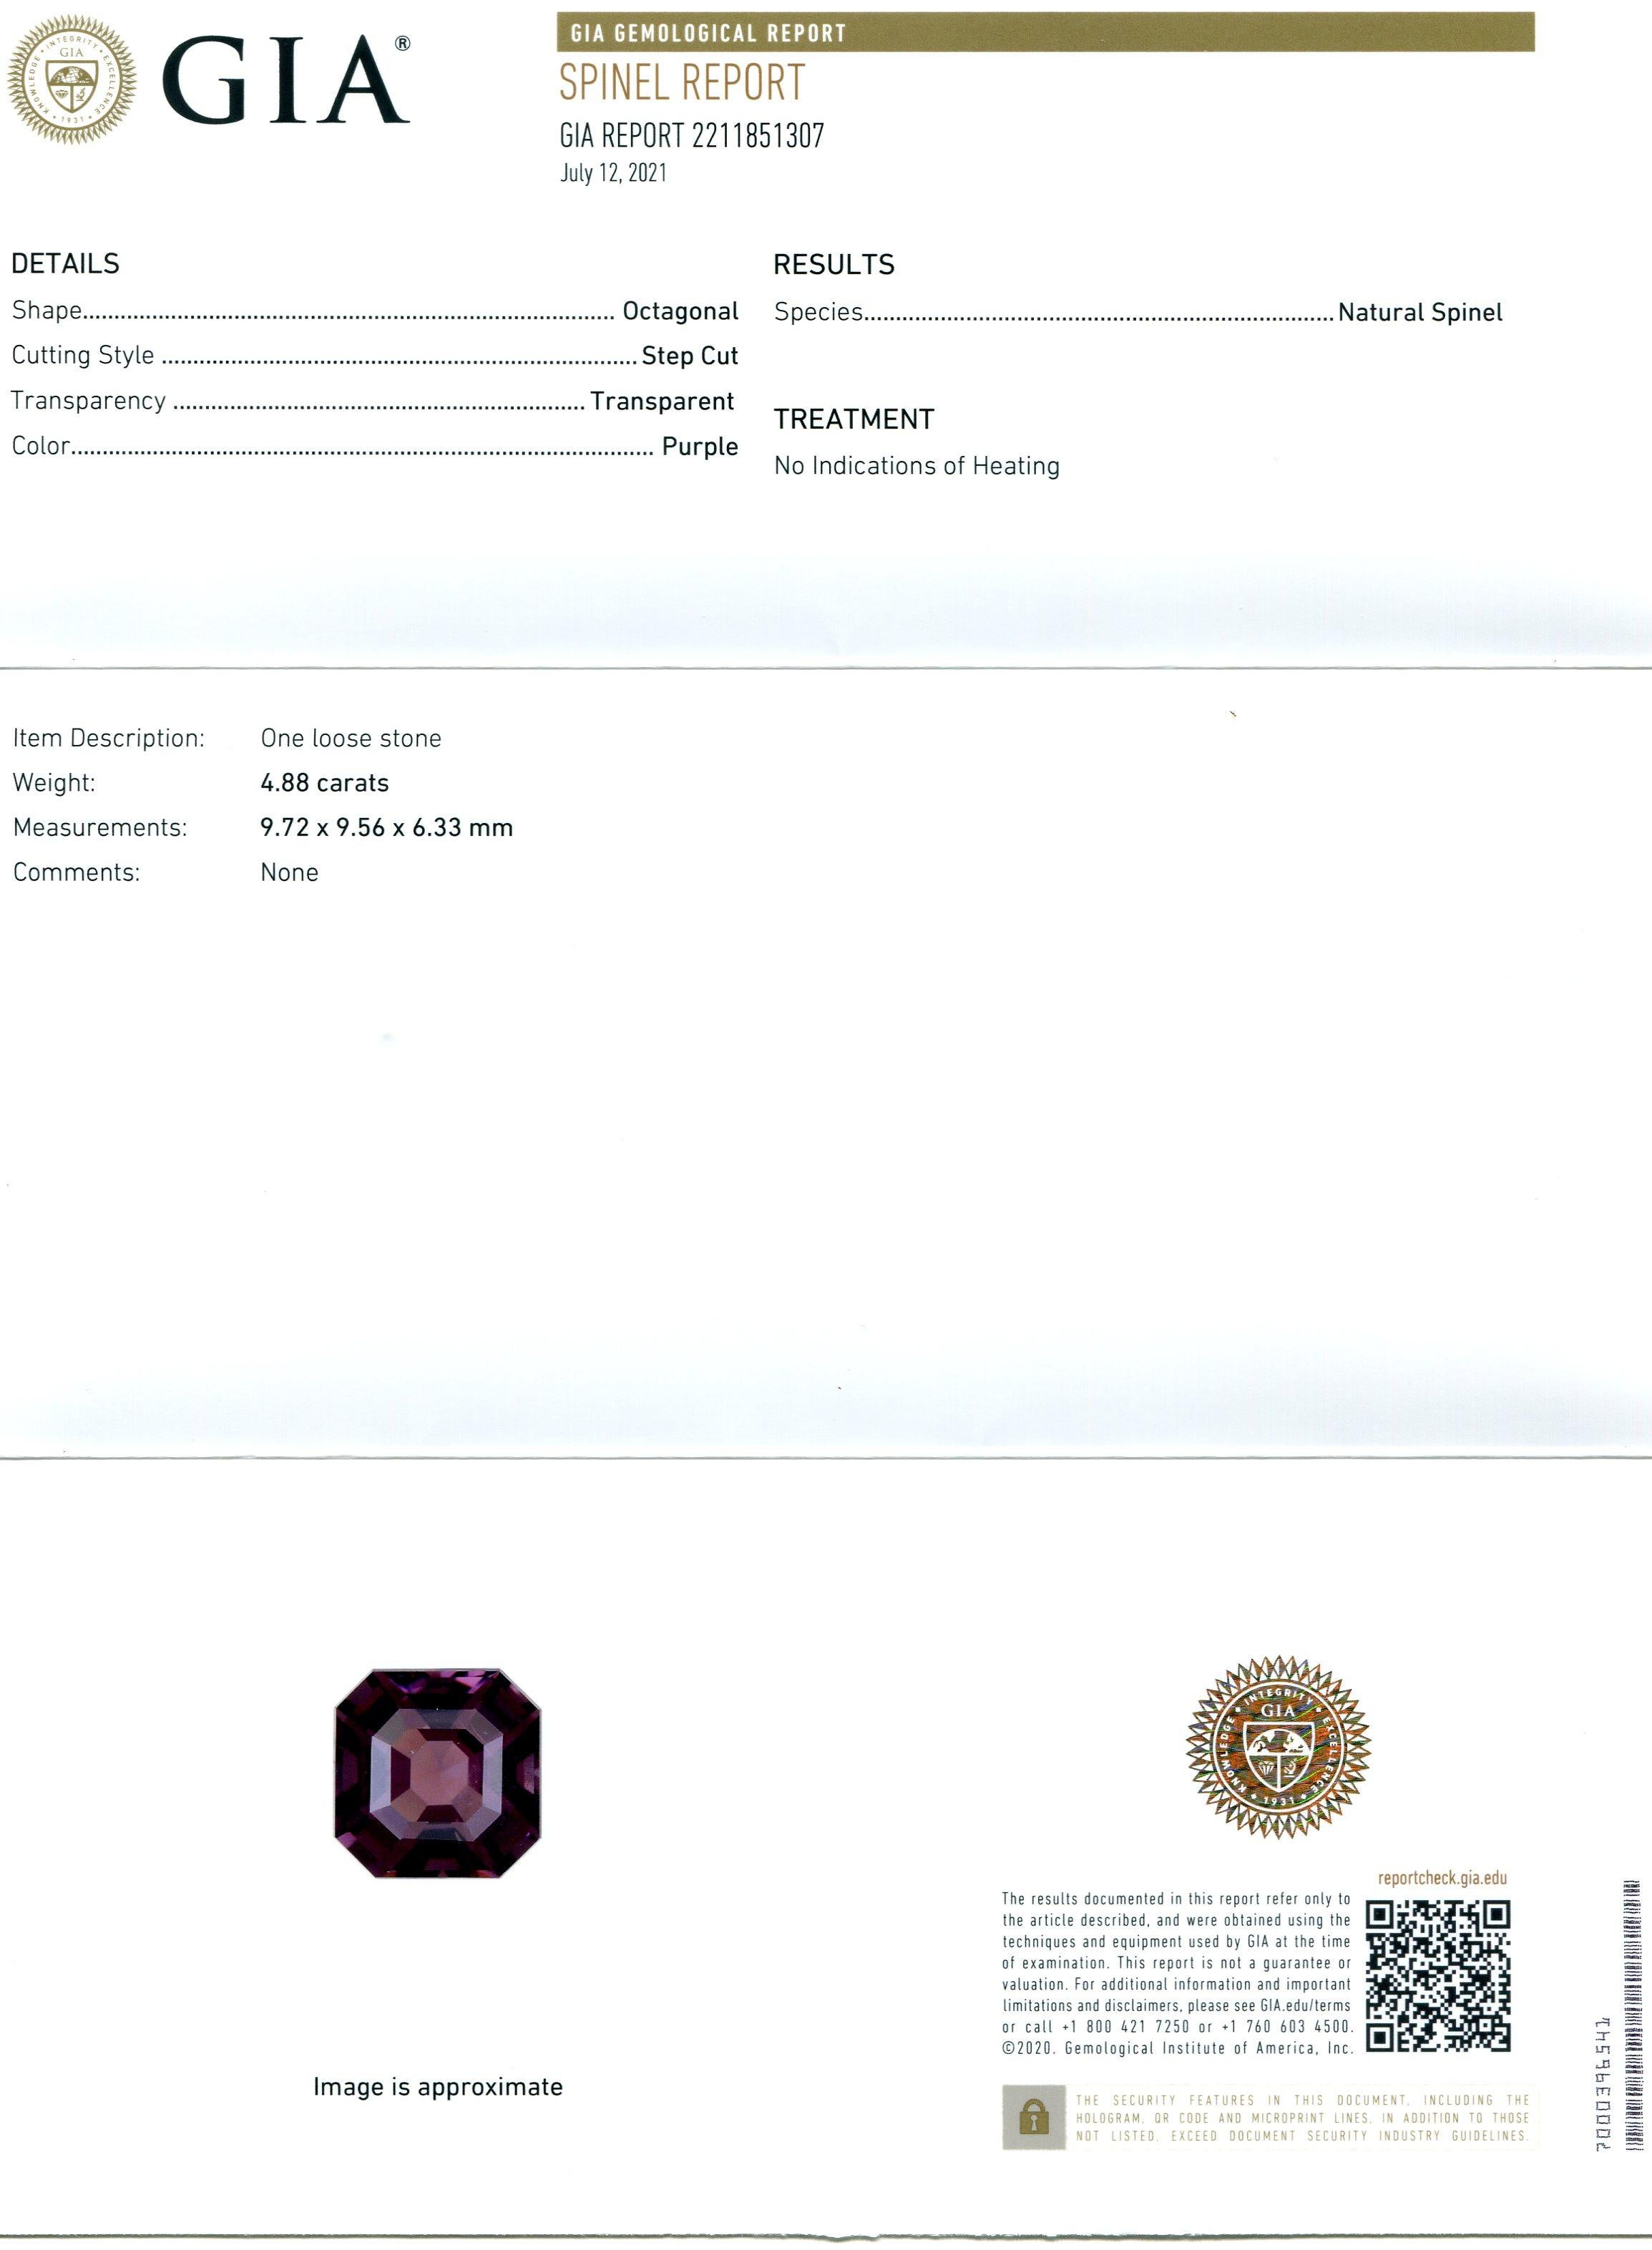 This is a stunning GIA Certified Spinel 

The GIA report reads as follows:

GIA Report Number: 2211851307
Shape: Octagonal
Cutting Style: Step Cut
Cutting Style: Crown: 
Cutting Style: Pavilion: 
Transparency: Transparent
Color: